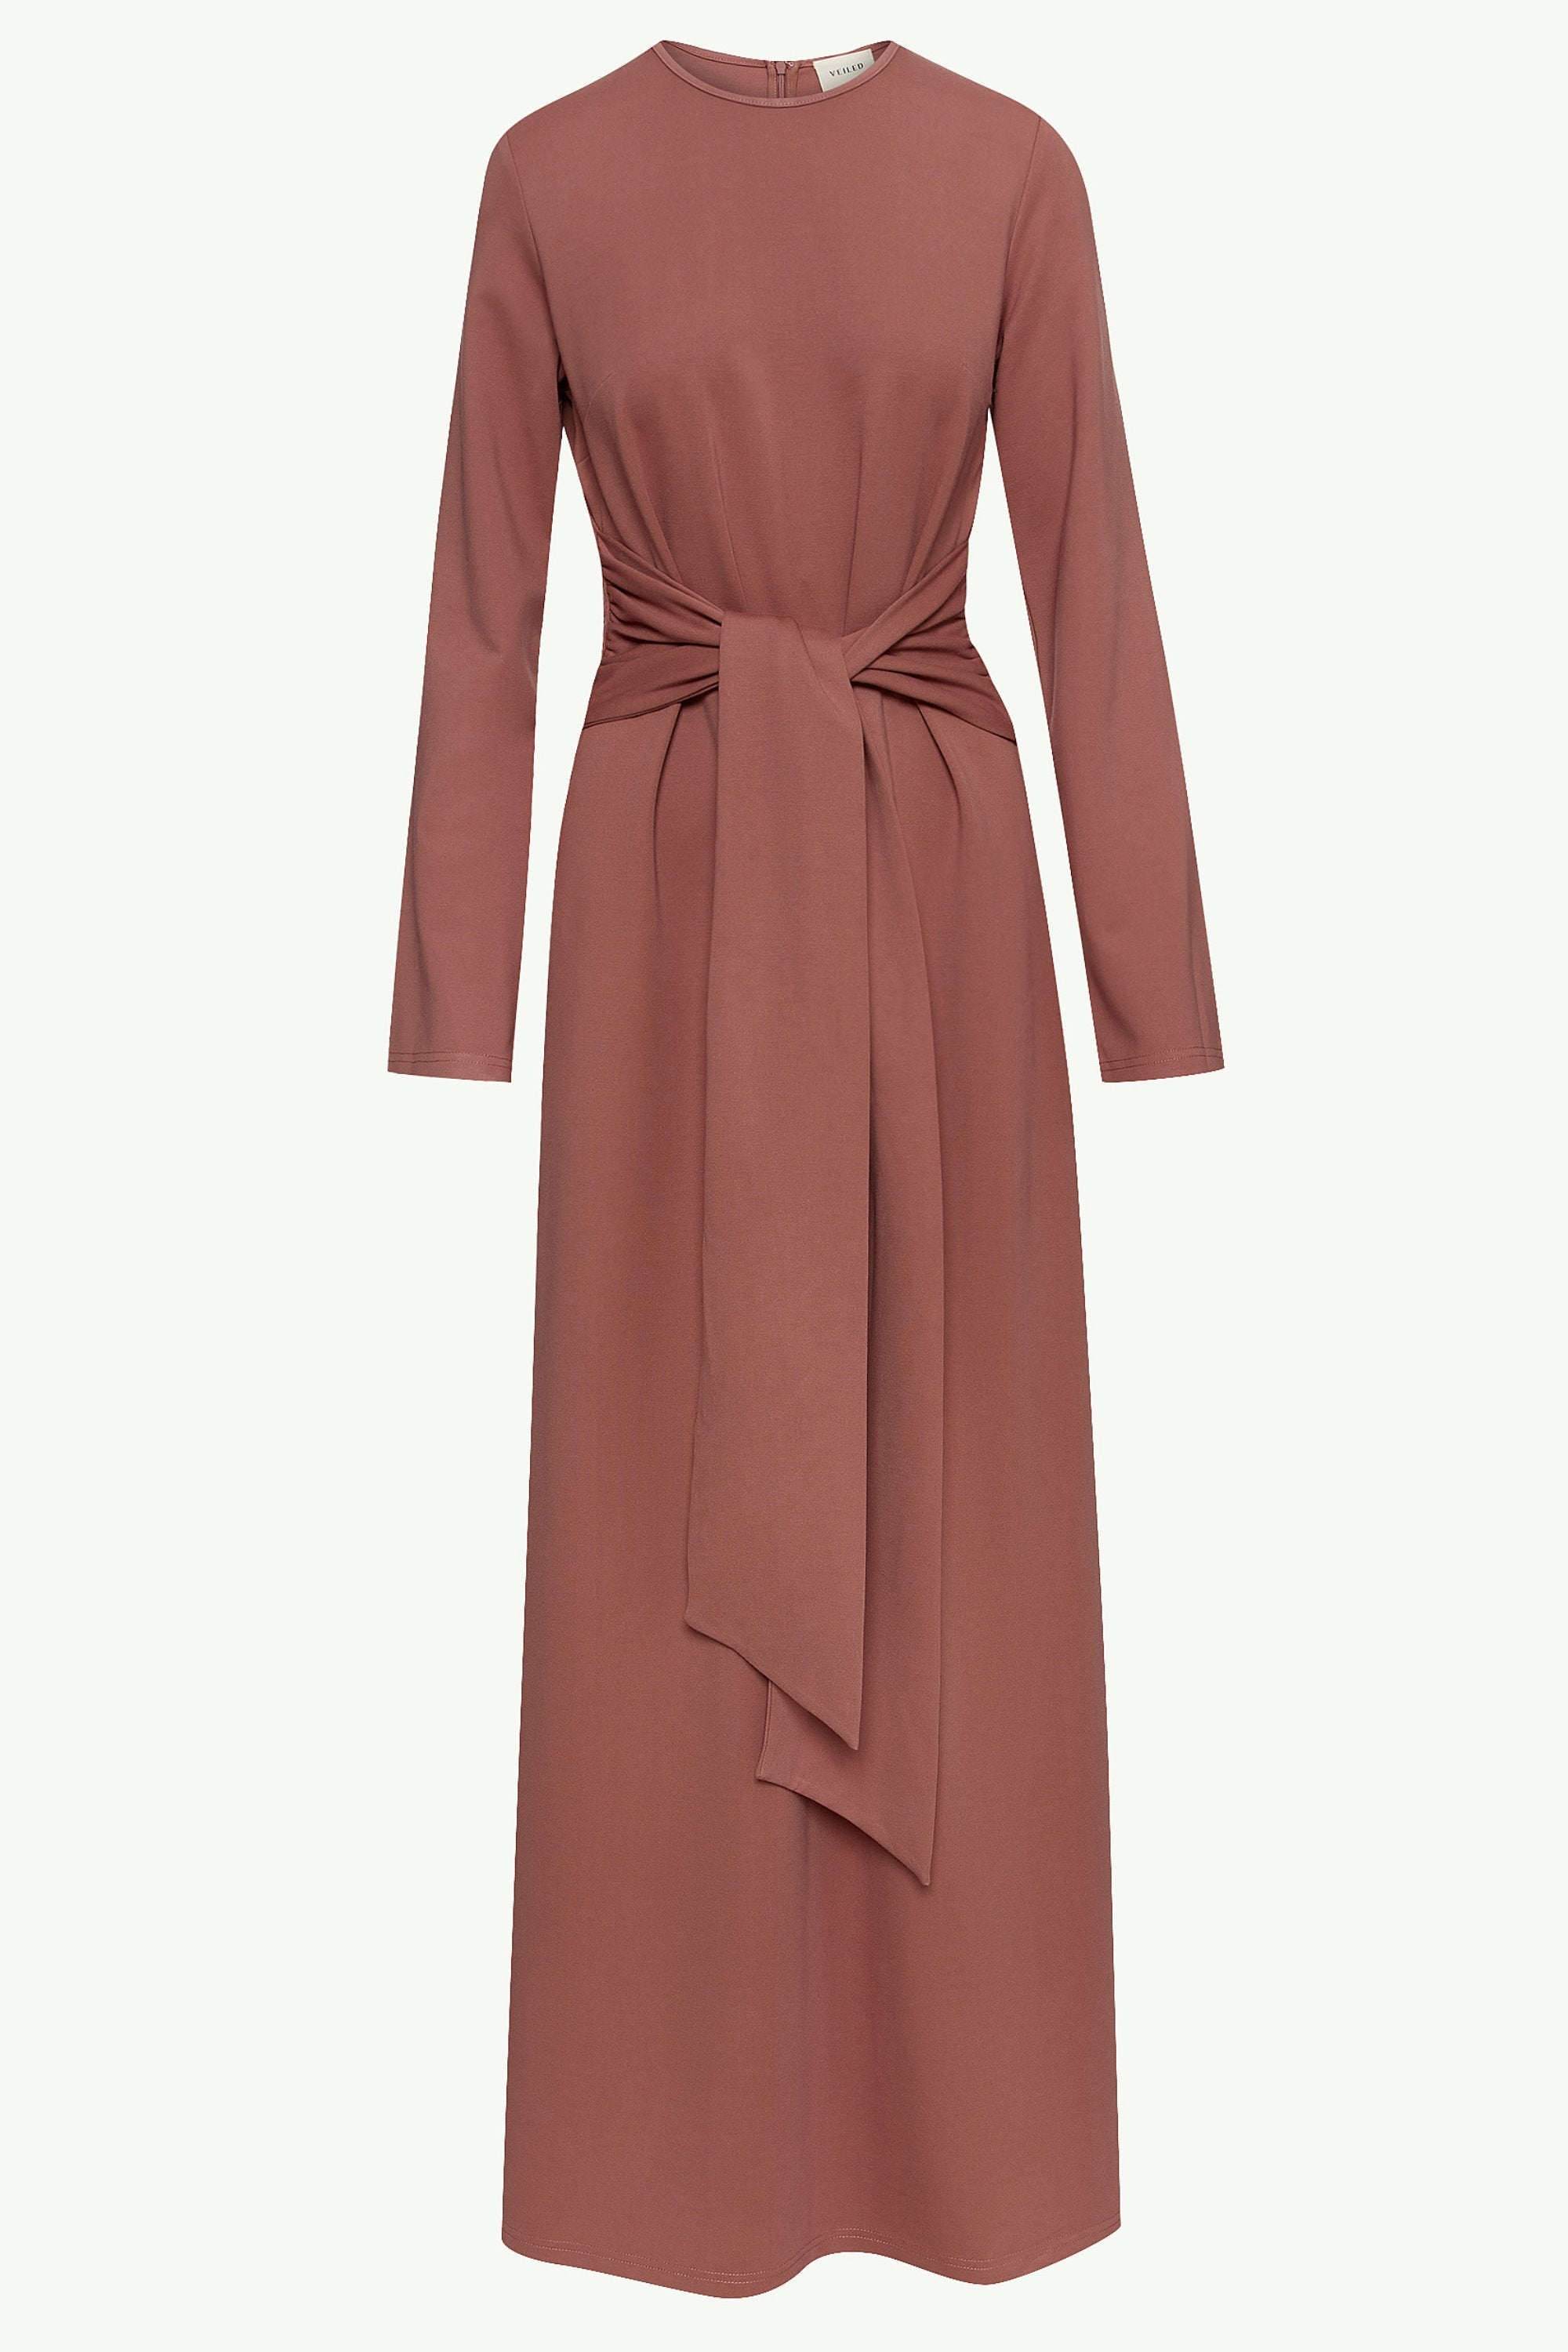 Jersey Tie Front Maxi Dress - Blush Nude Clothing Veiled 